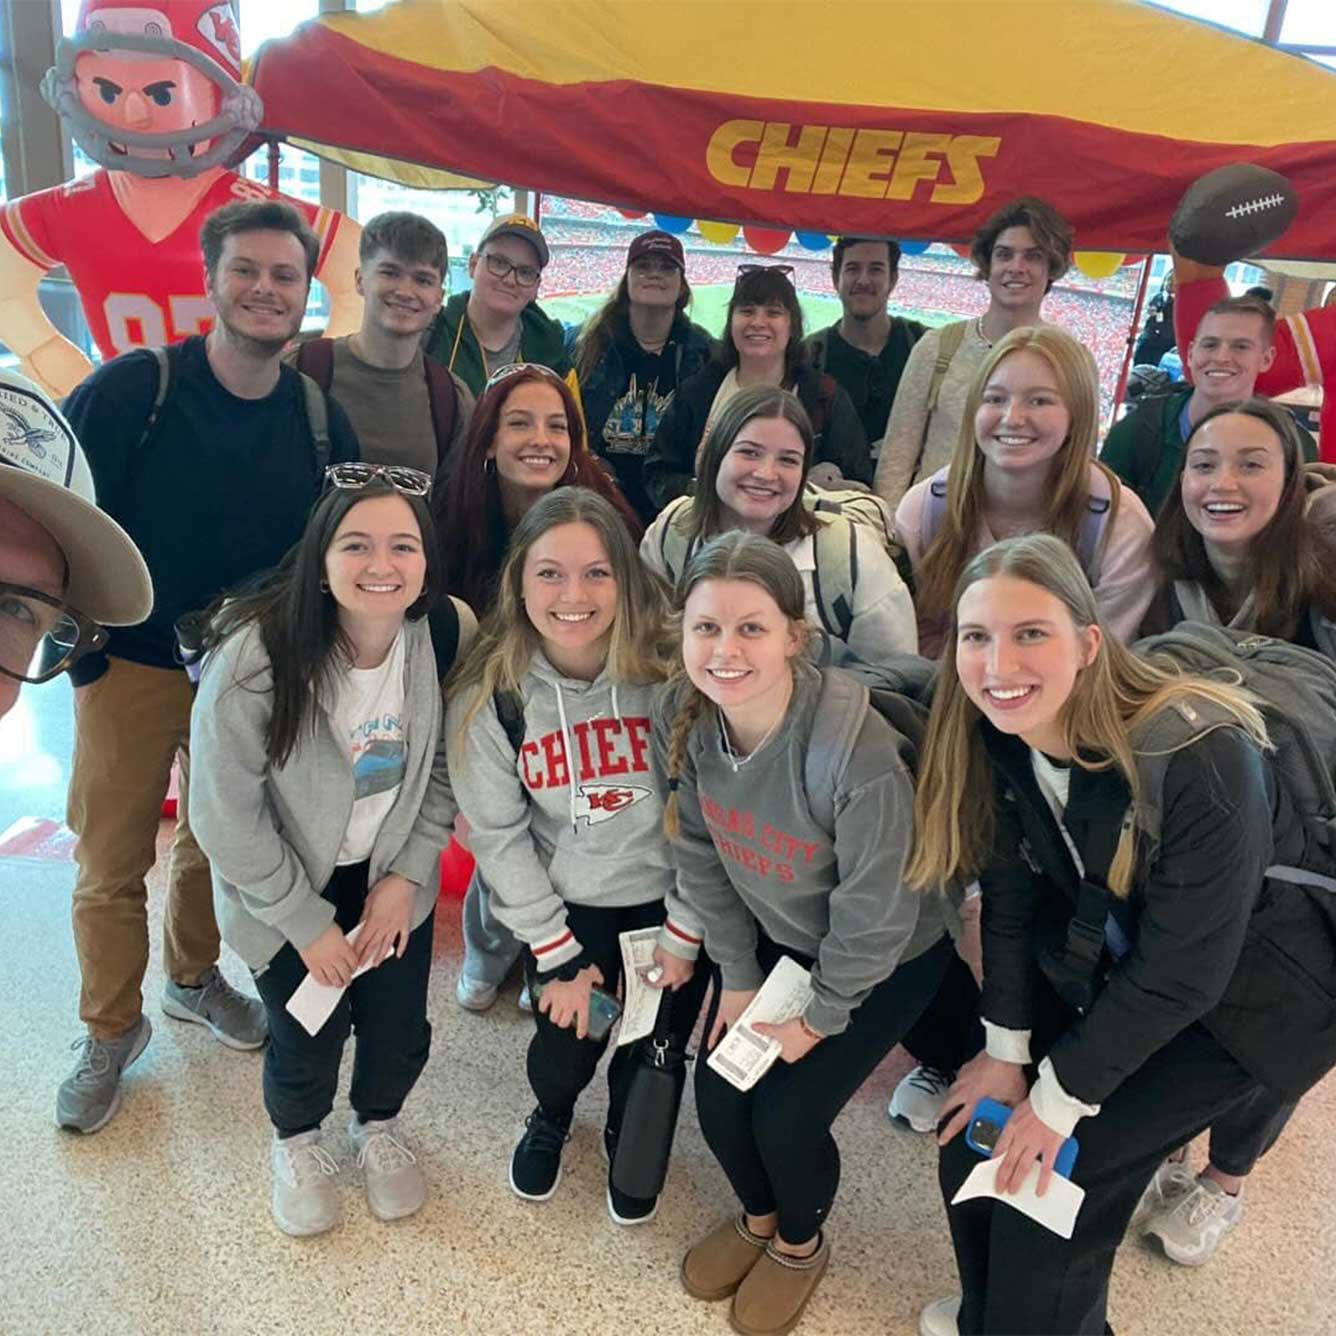 Sixteen MSU students assemble for a group picture under a Chiefs-themed canopy at the big game.